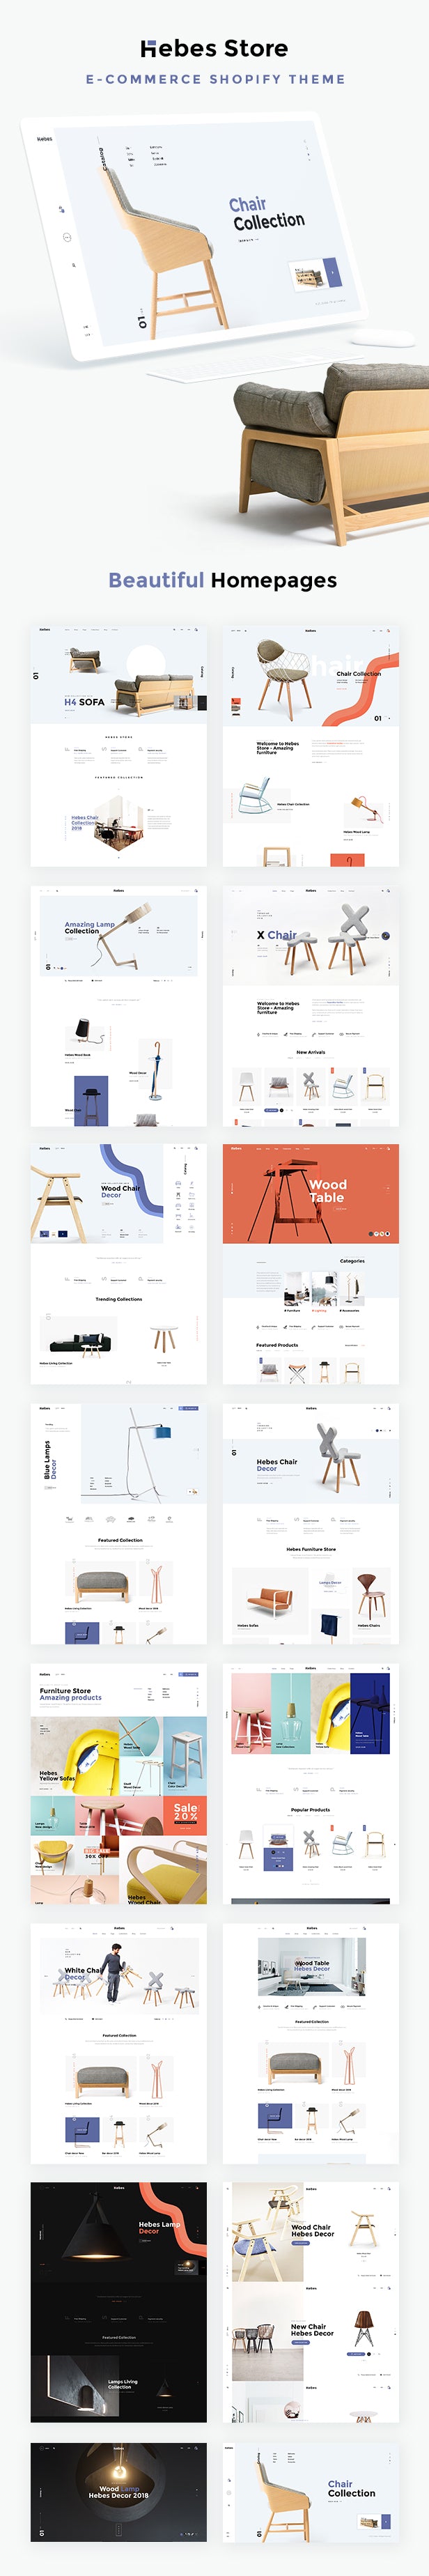 hebes shopify theme